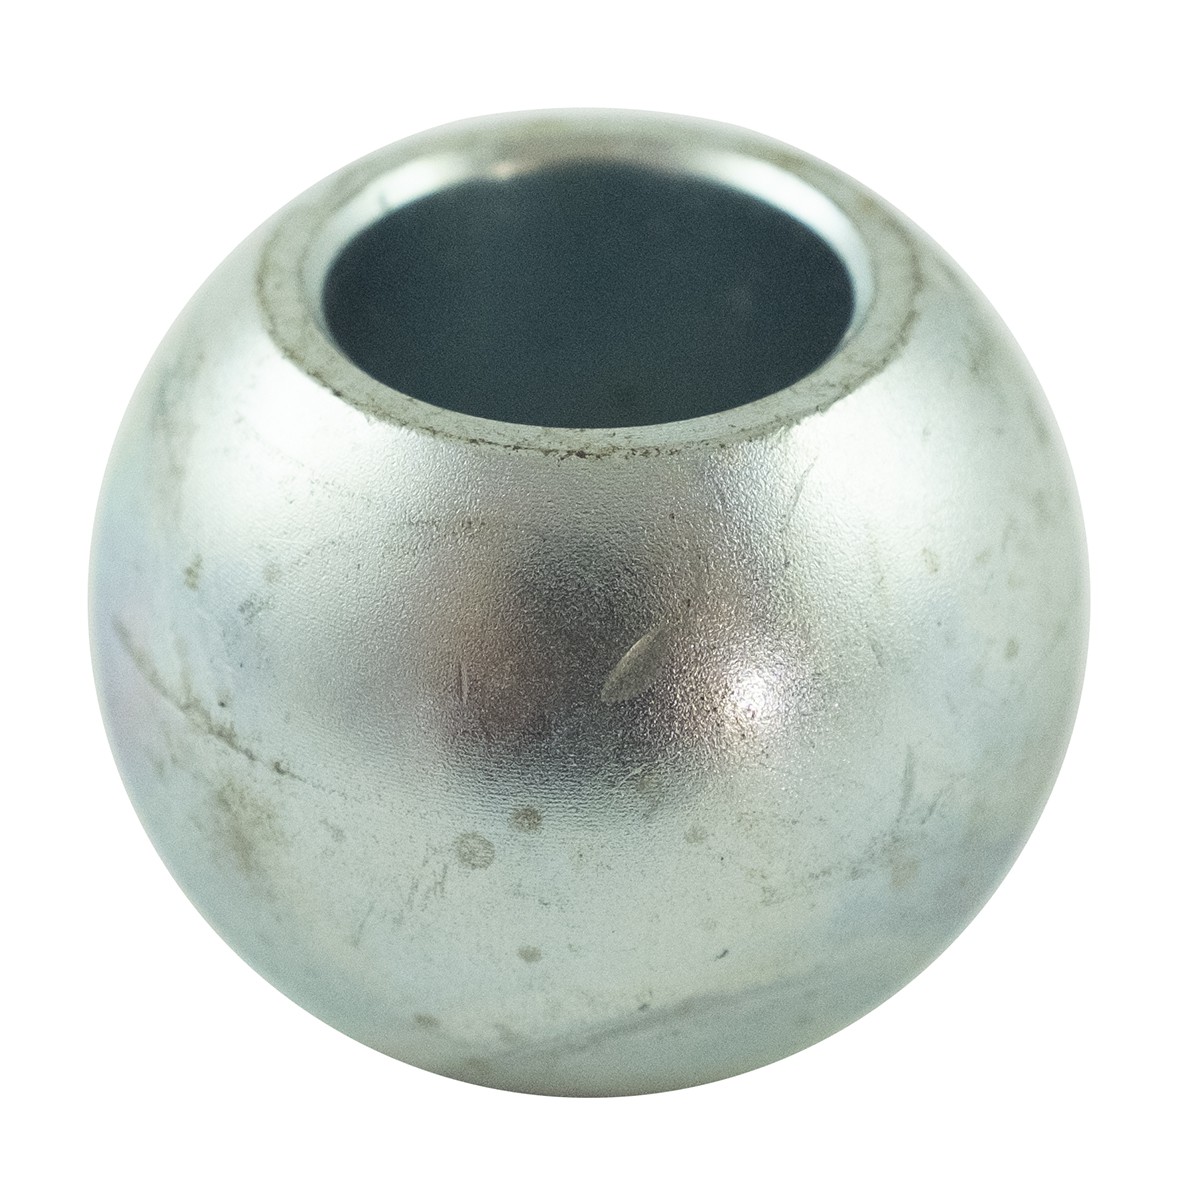 TRG896 hitch ball No. 40009831 Ls Tractor